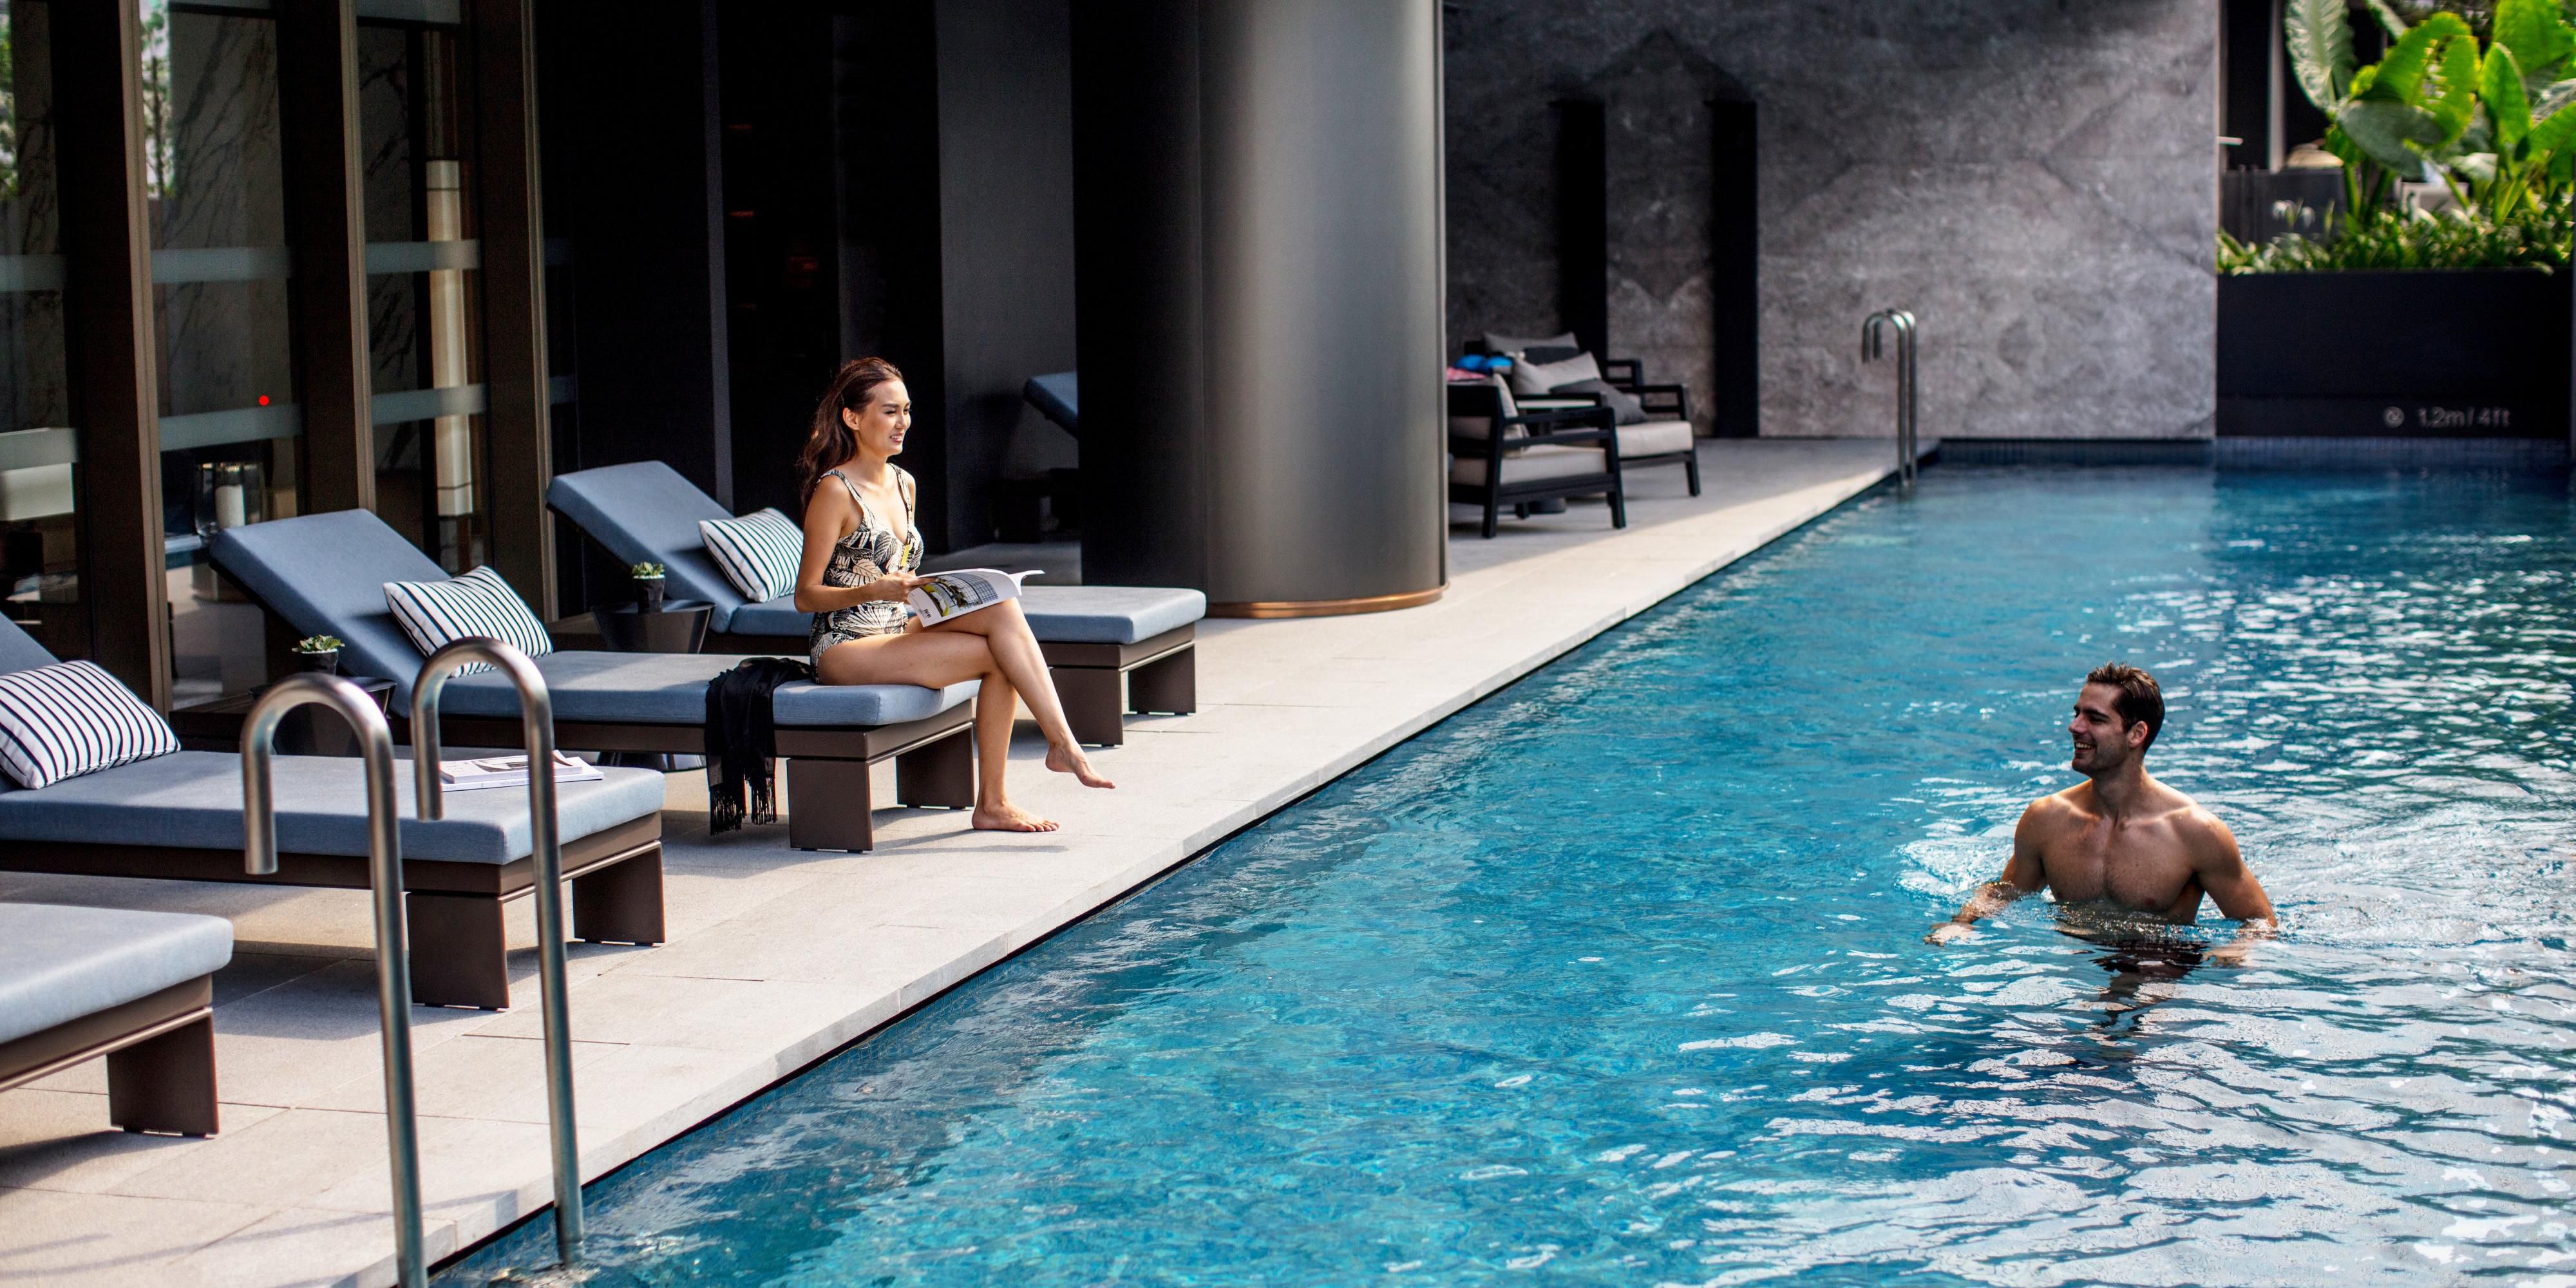 Cool off by the pool with a cocktail or take a leisurely dip to relax and unwind at the end of the day. Whether you’re here for laps or a laze on a lounger, our pool is a great place to take a break from the frenetic pace of the city.